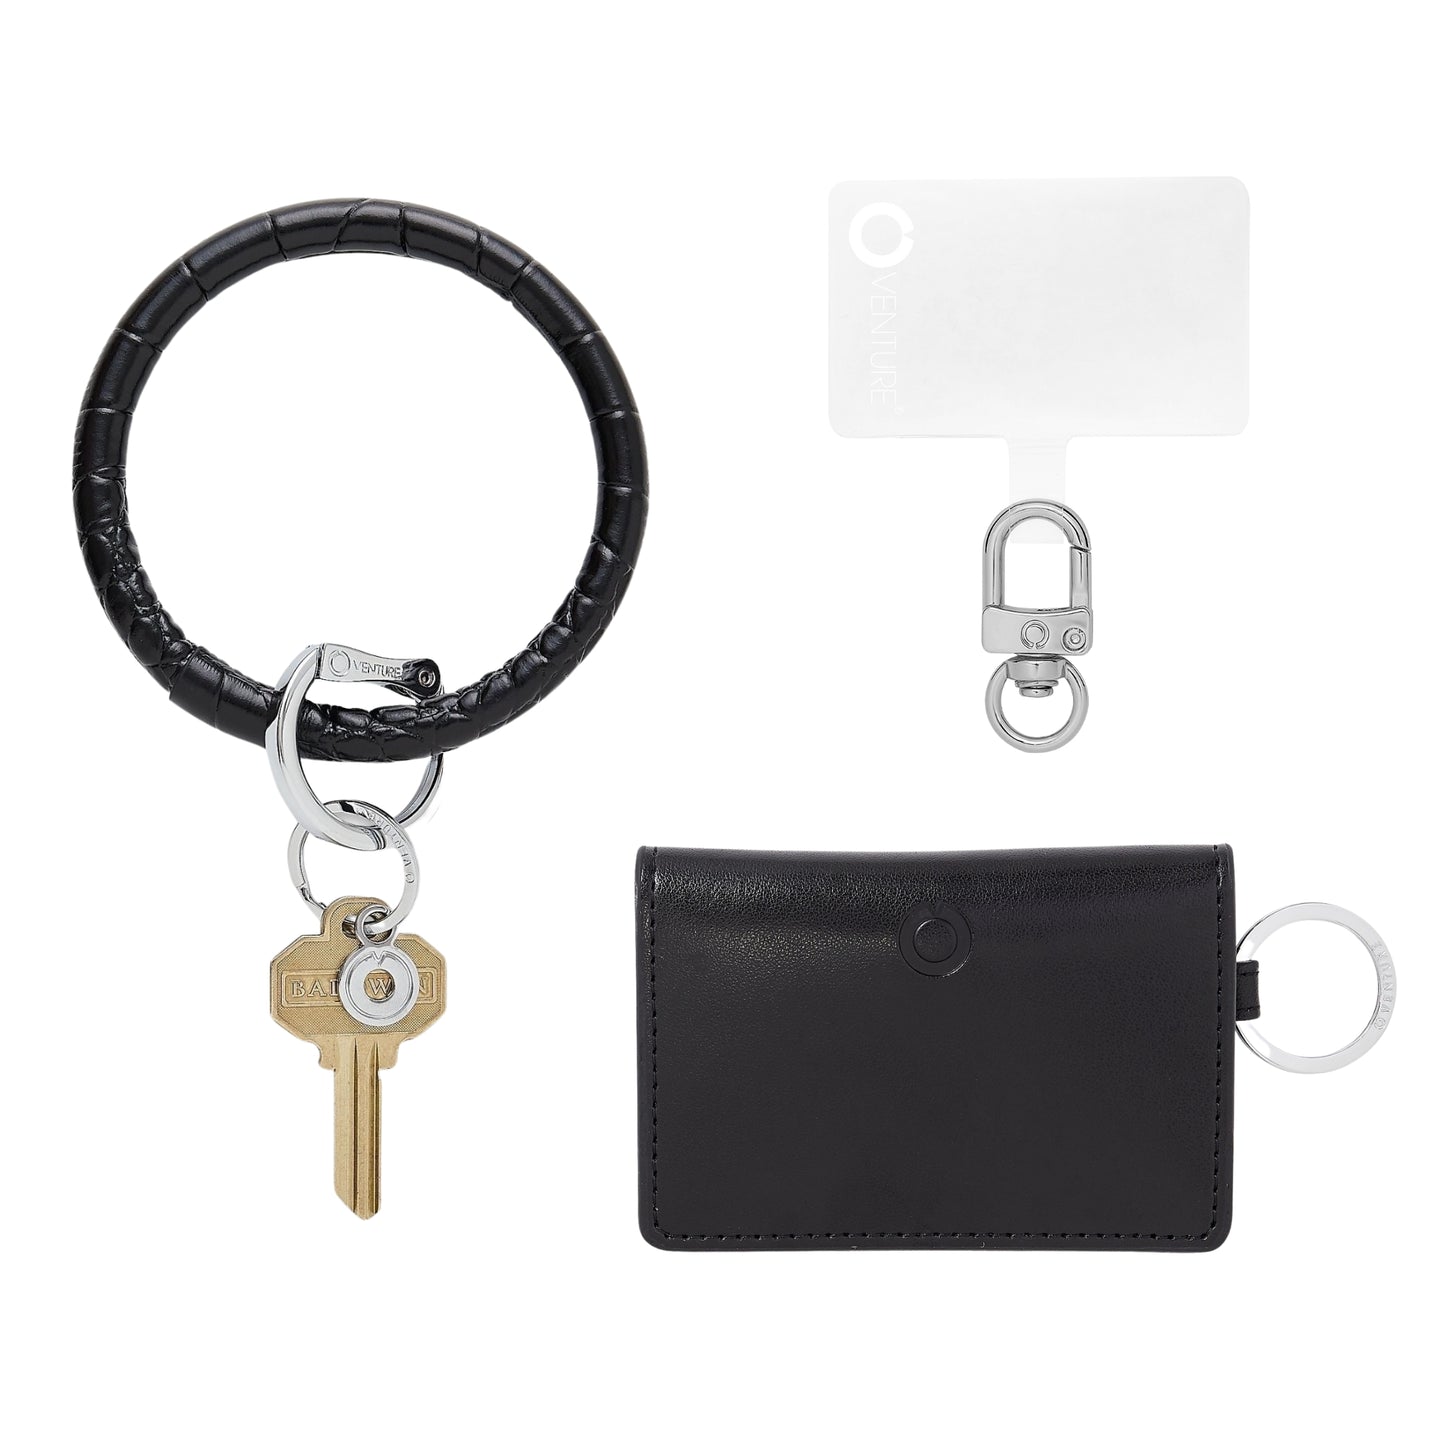 Big O Key Ring in Black Croc Leather with wallet in black leather and phone connector.